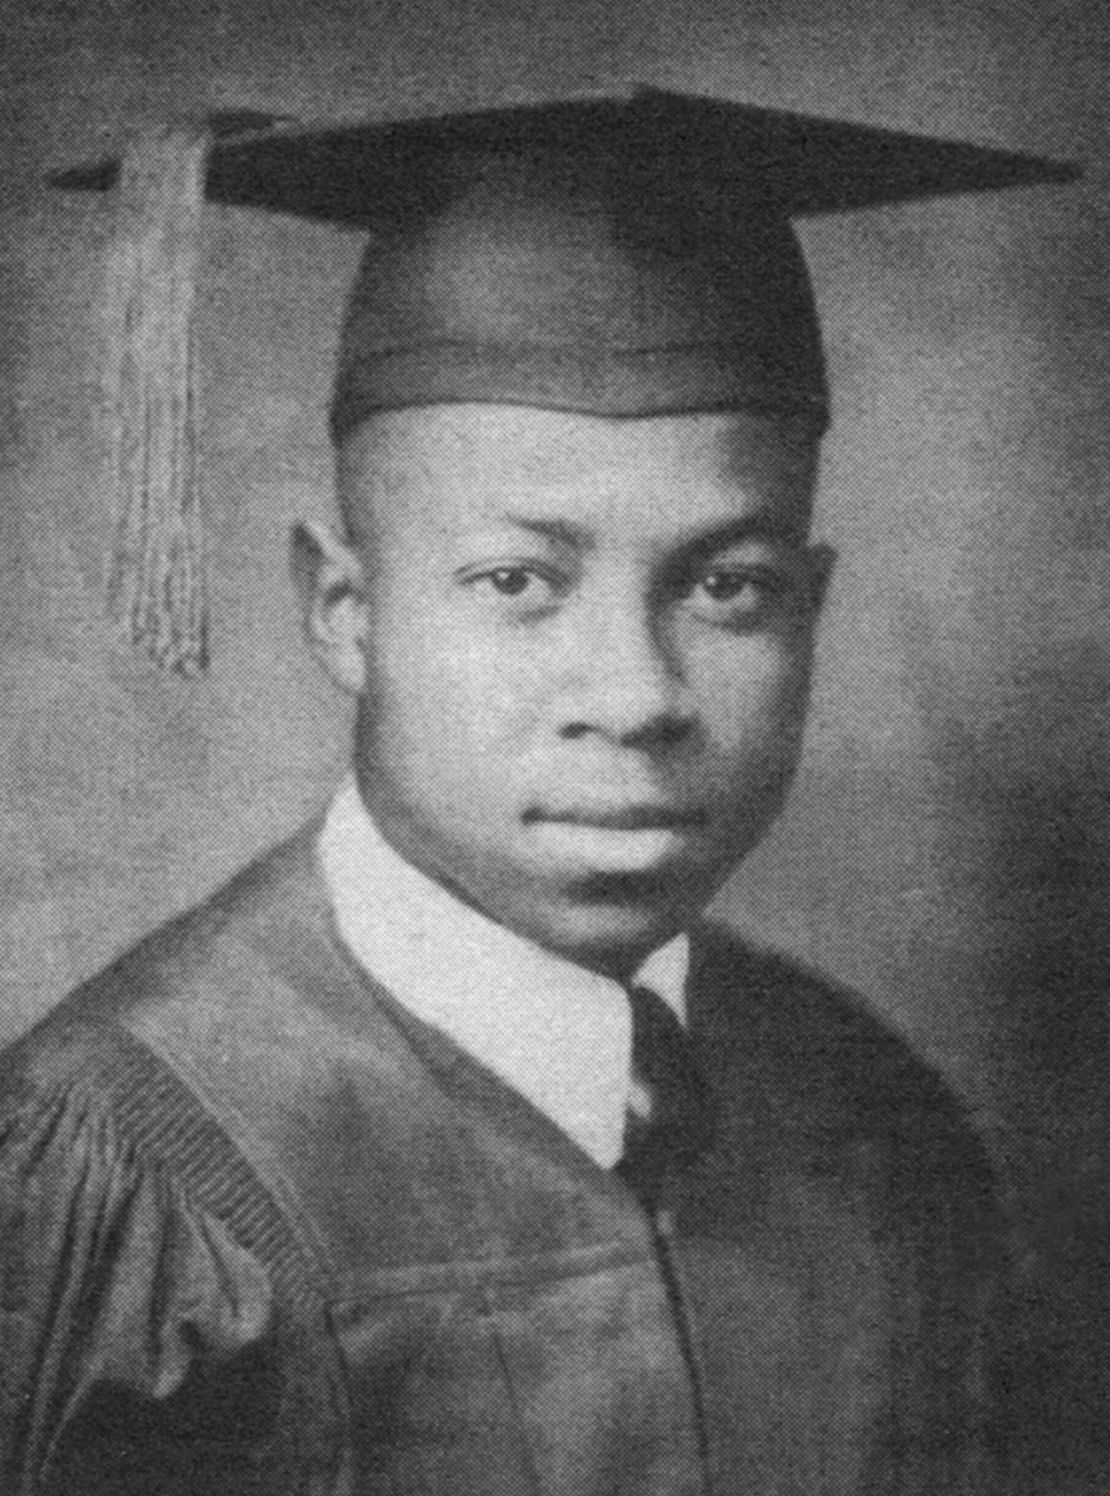 Brown's 1944 high school graduation photo. He was such a brilliant student that one of his instructors let him teach when she was busy with other work.